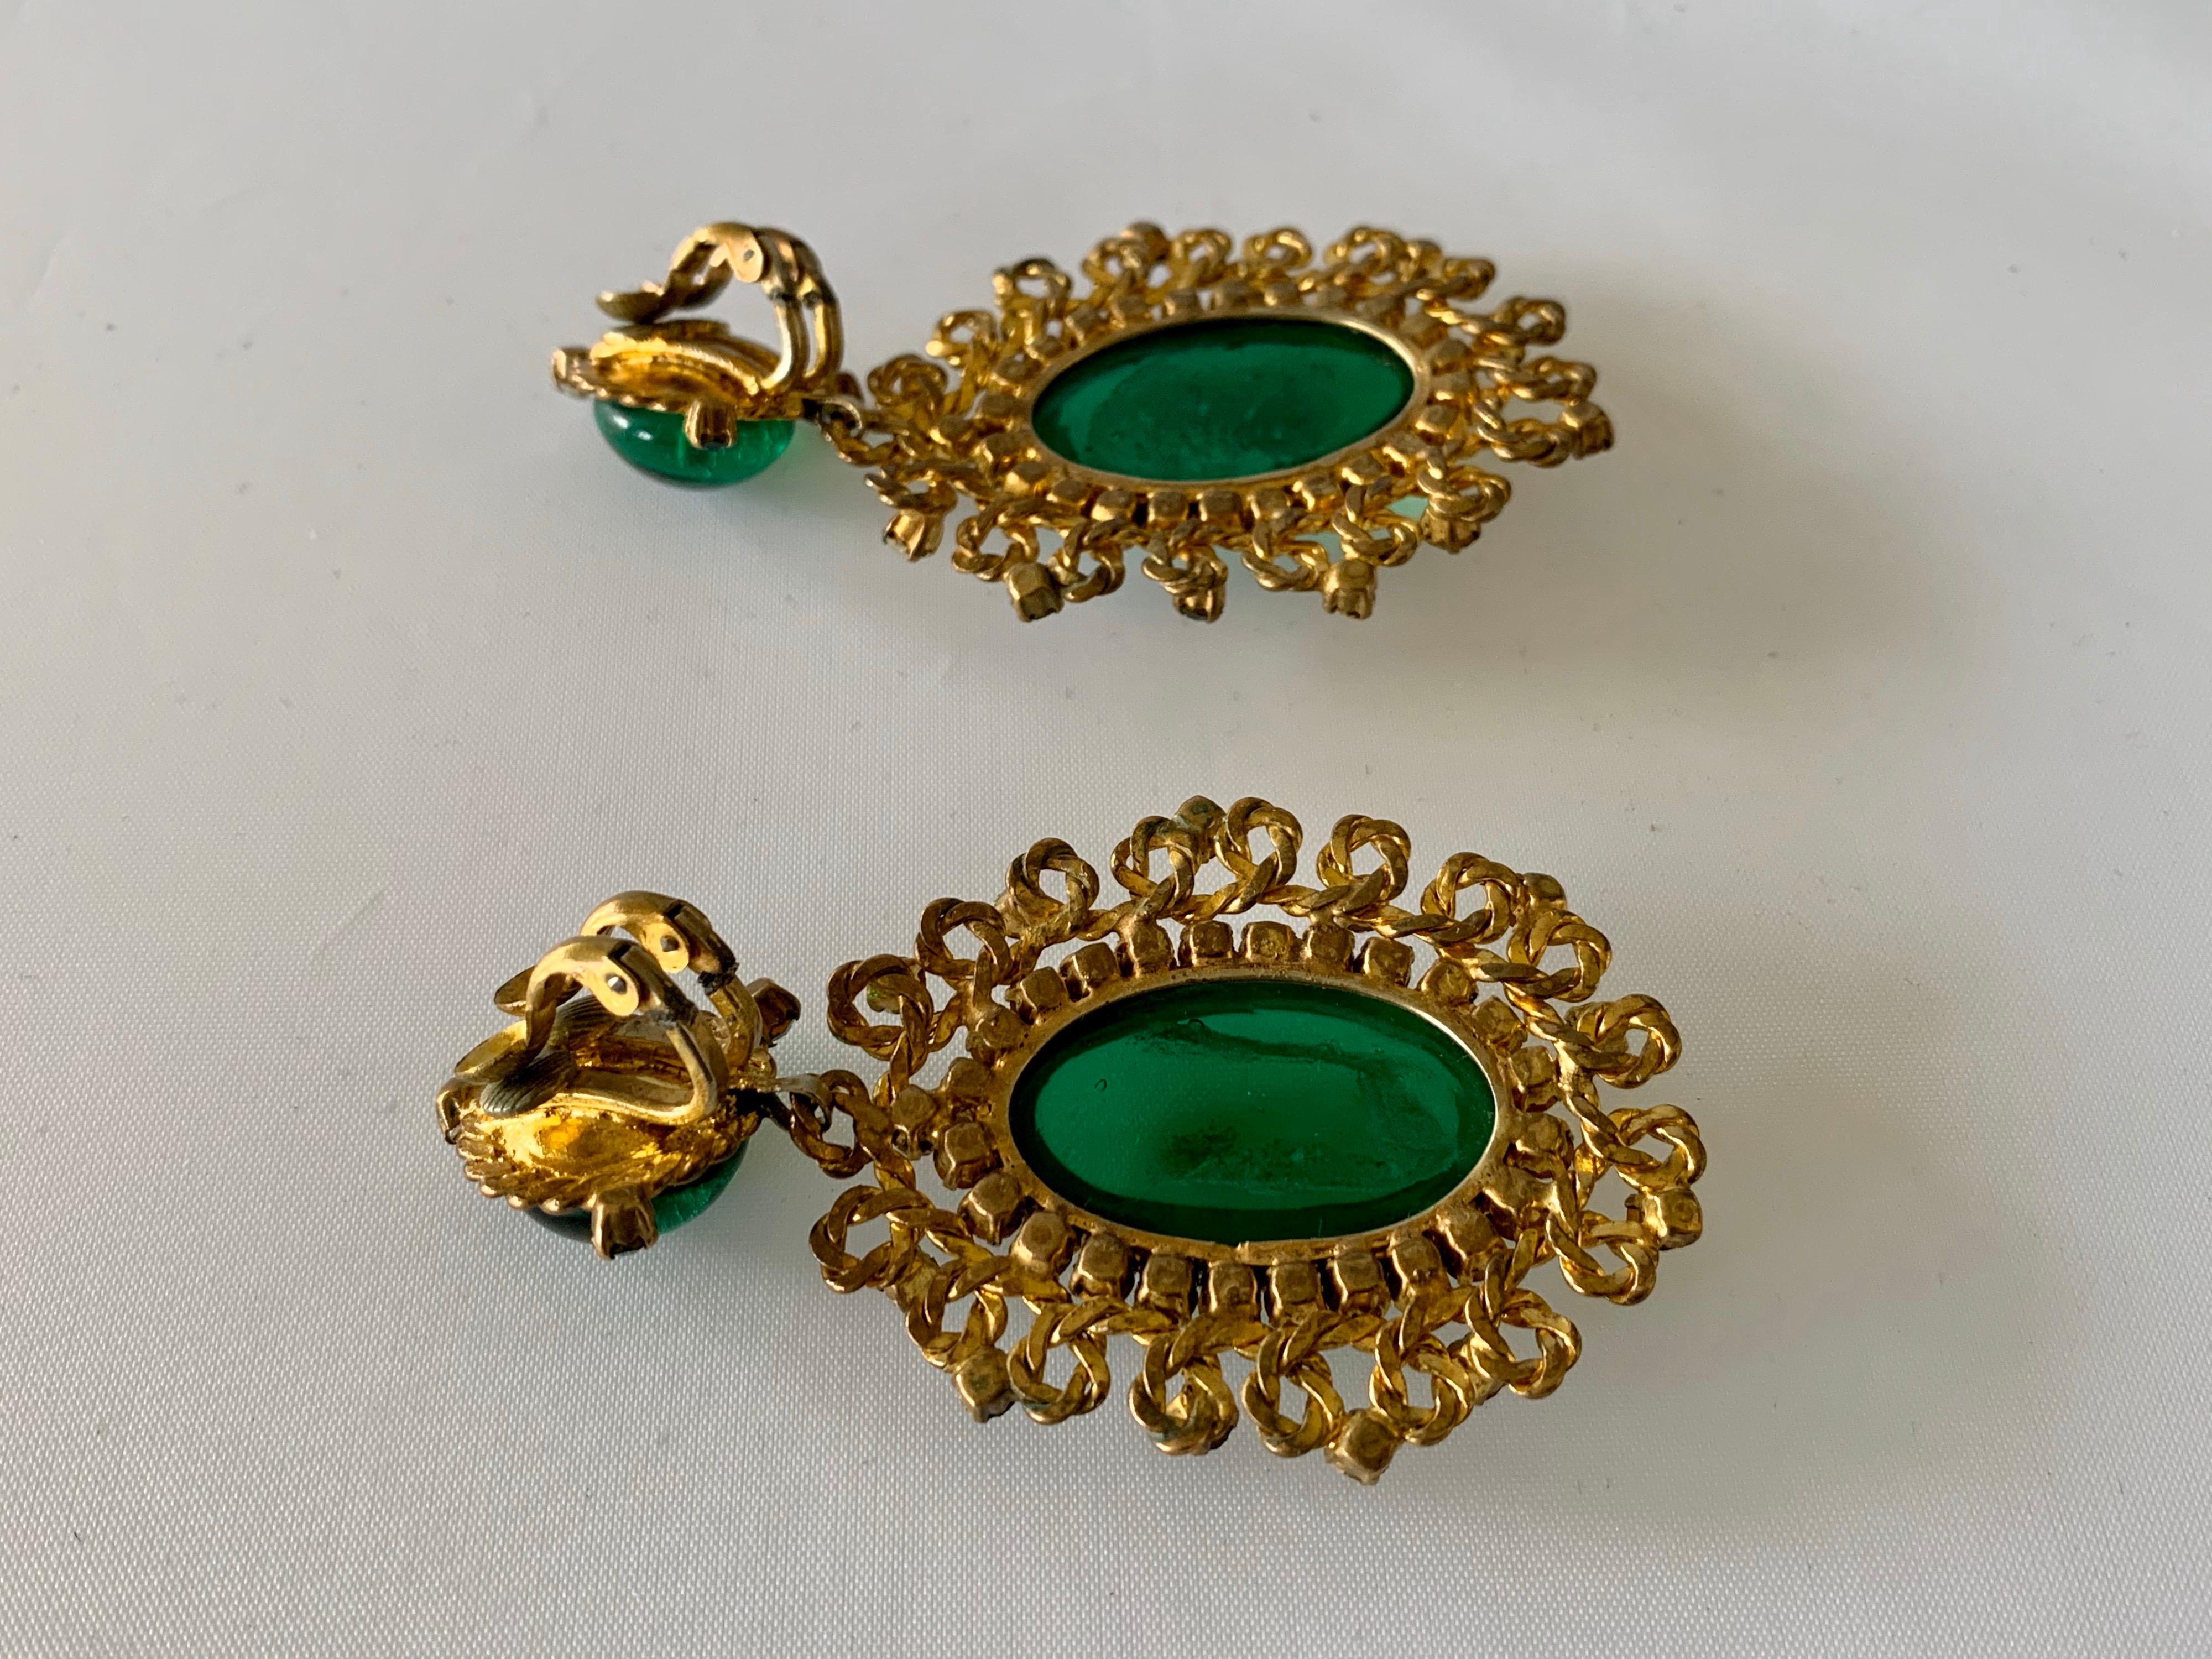 Exceptional Emerald and Diamante Statement Earrings by Maison Gripoix for Chanel 1